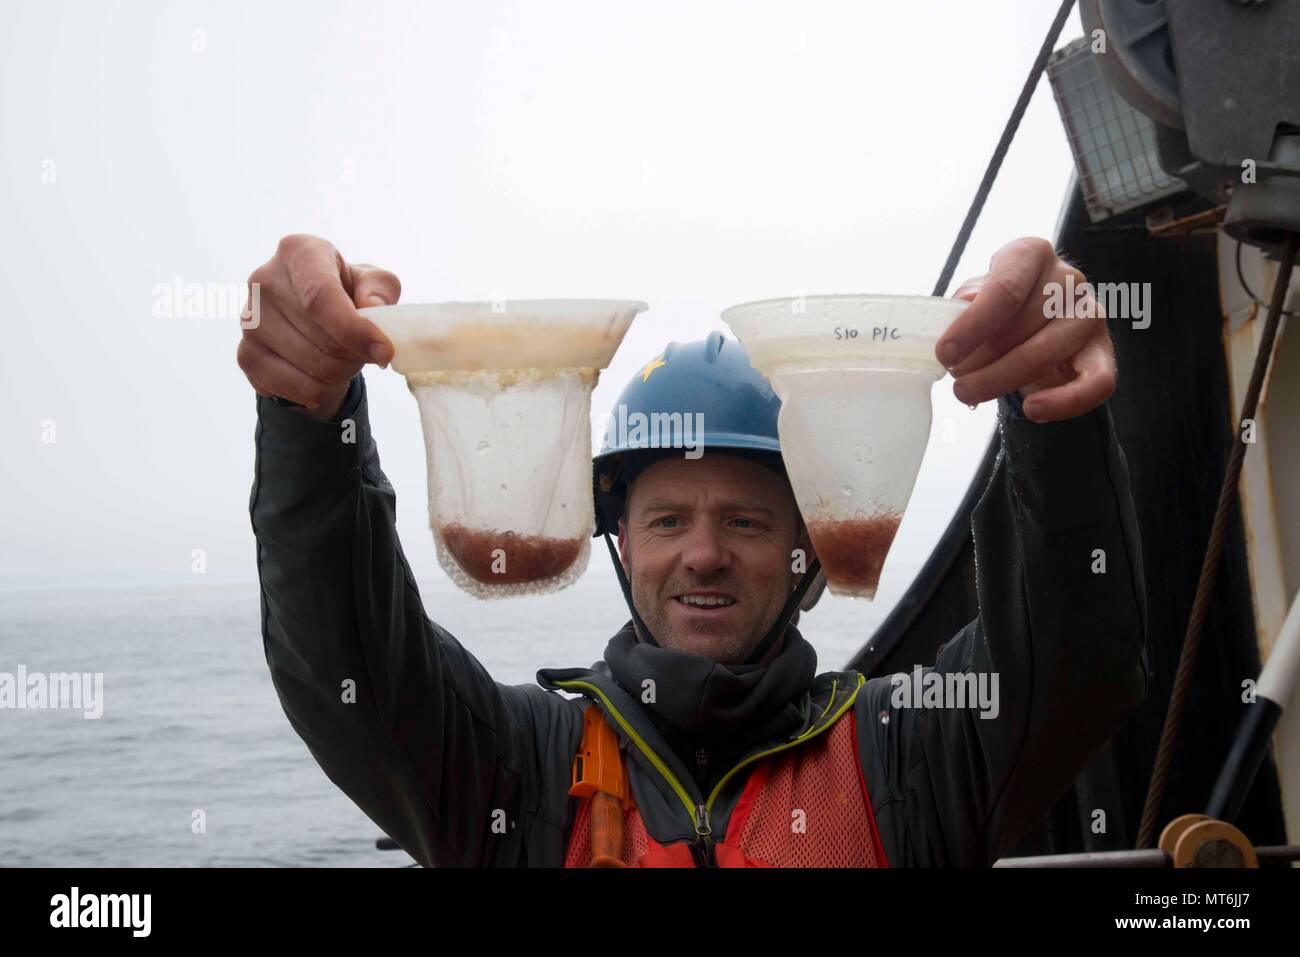 Josh Jones, a graduate student researcher at the Scripps Institution of Oceanography in San Diego, California, holds up samples of zooplankton aboard Coast Guard Cutter Maple in the Arctic Ocean east of Barrow, Alaska, July 26, 2017. The crew of the 225-foot buoy tender out of Sitka is working to support Jones' marine mammal research. (U.S. Coast Guard photo by Petty Officer 2nd Class Nate Littlejohn/Released) Stock Photo